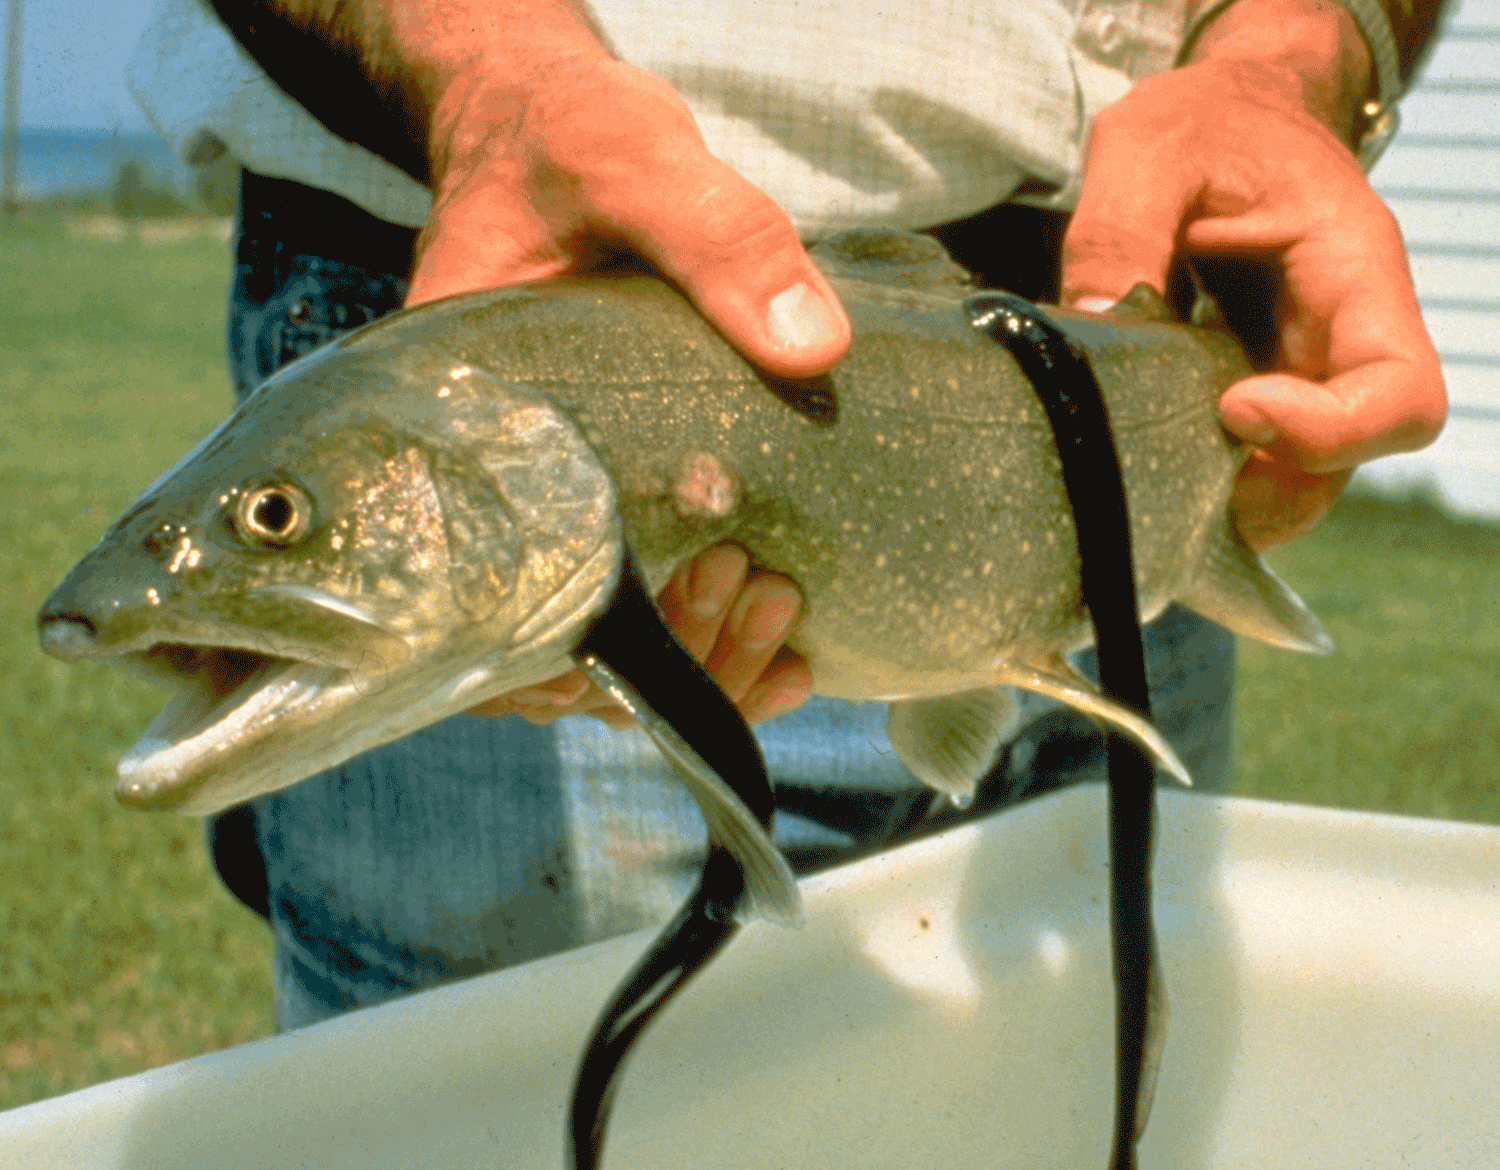 Photograph of two lampreys attached to a lake trout.